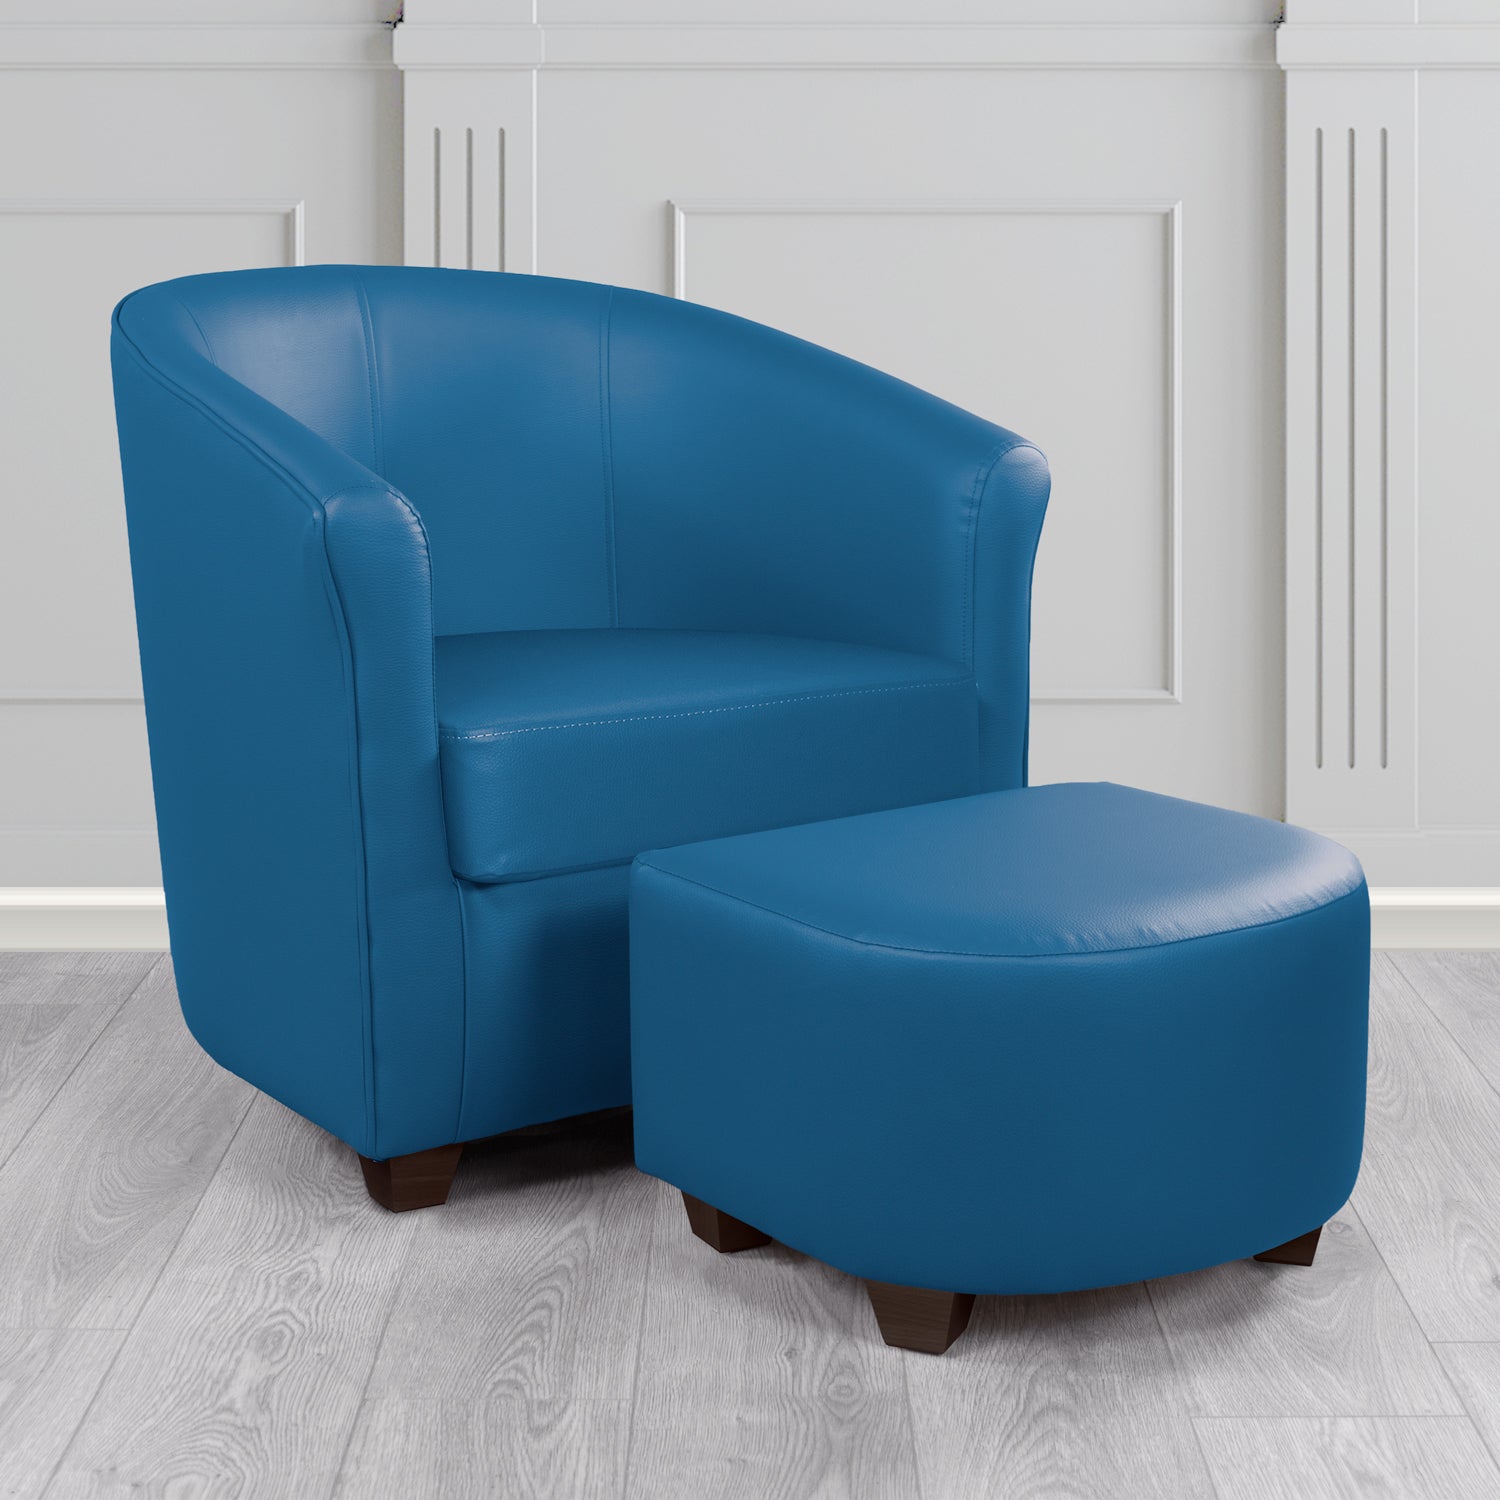 Cannes Tub Chair with Footstool Set in Madrid Royal Faux Leather - The Tub Chair Shop